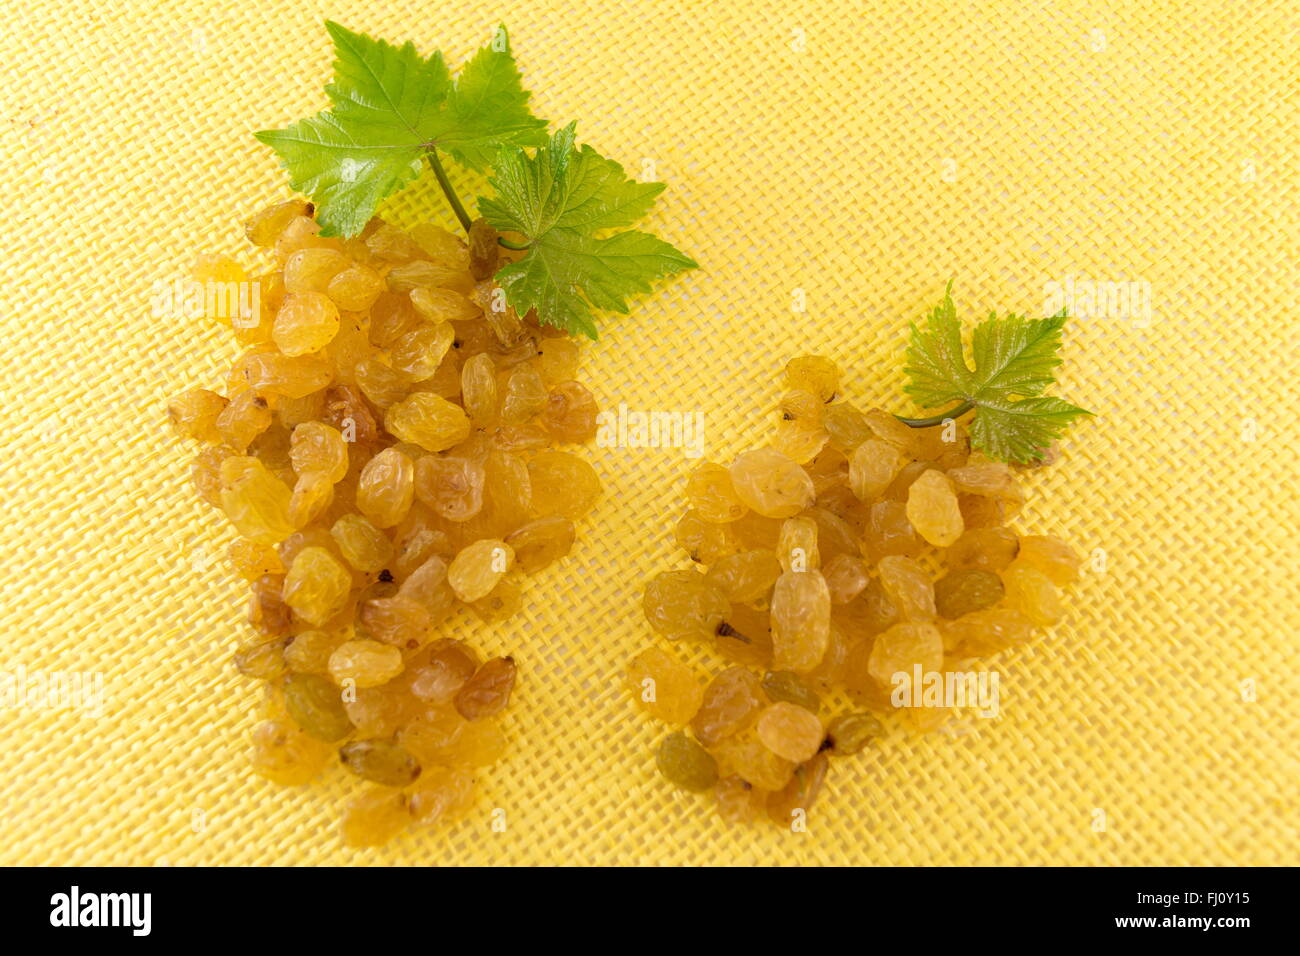 Raisins forming a grape clusters on yellow background Stock Photo